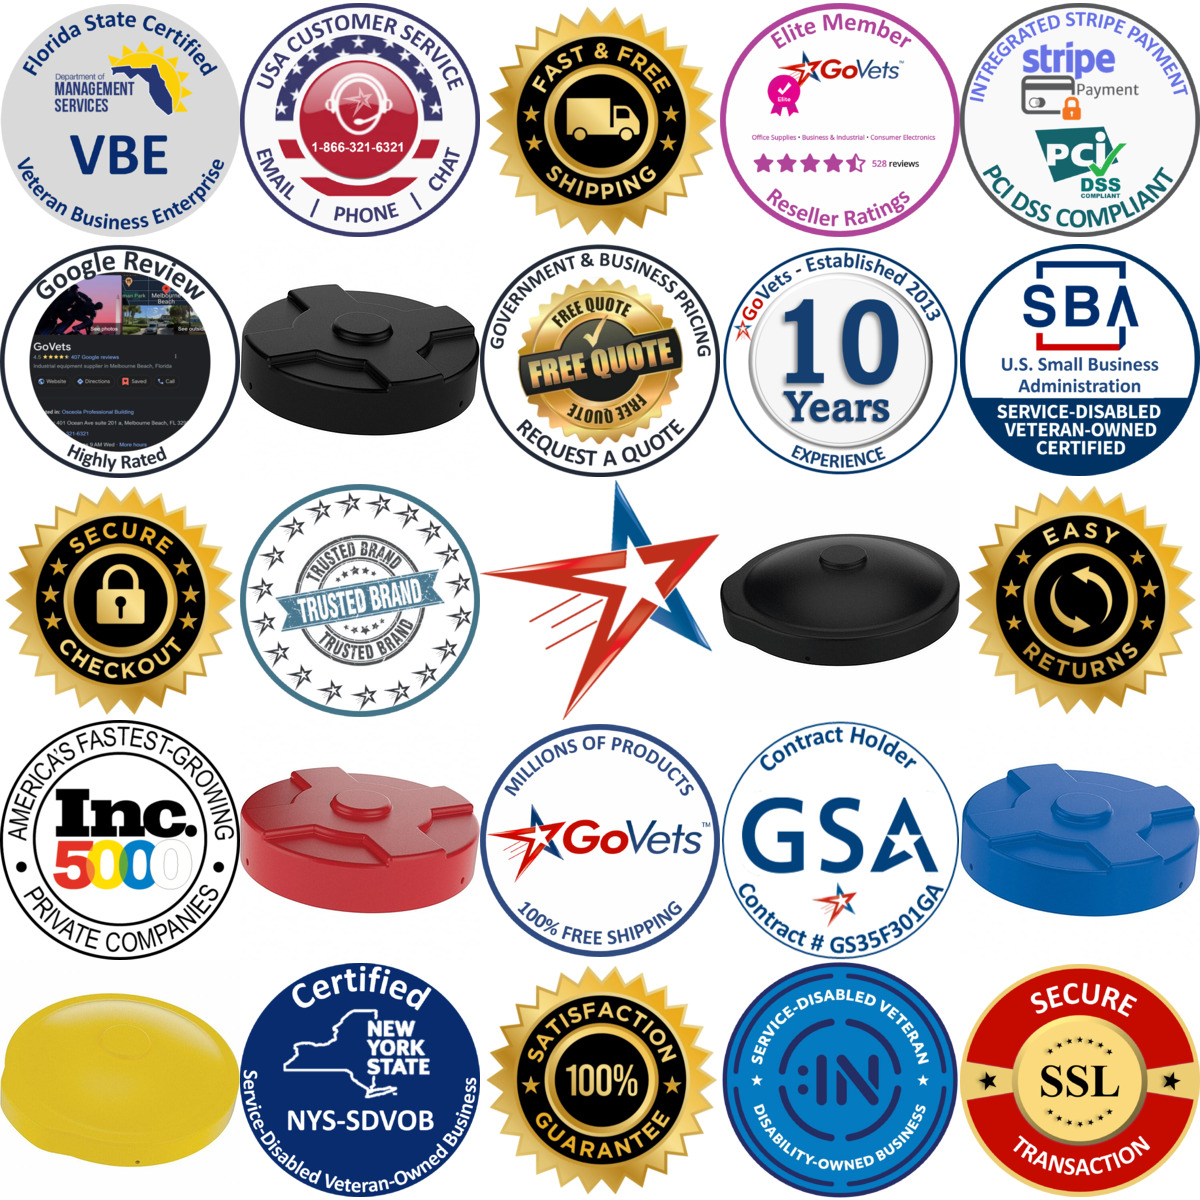 A selection of Trash Can and Recycling Container Lids products on GoVets